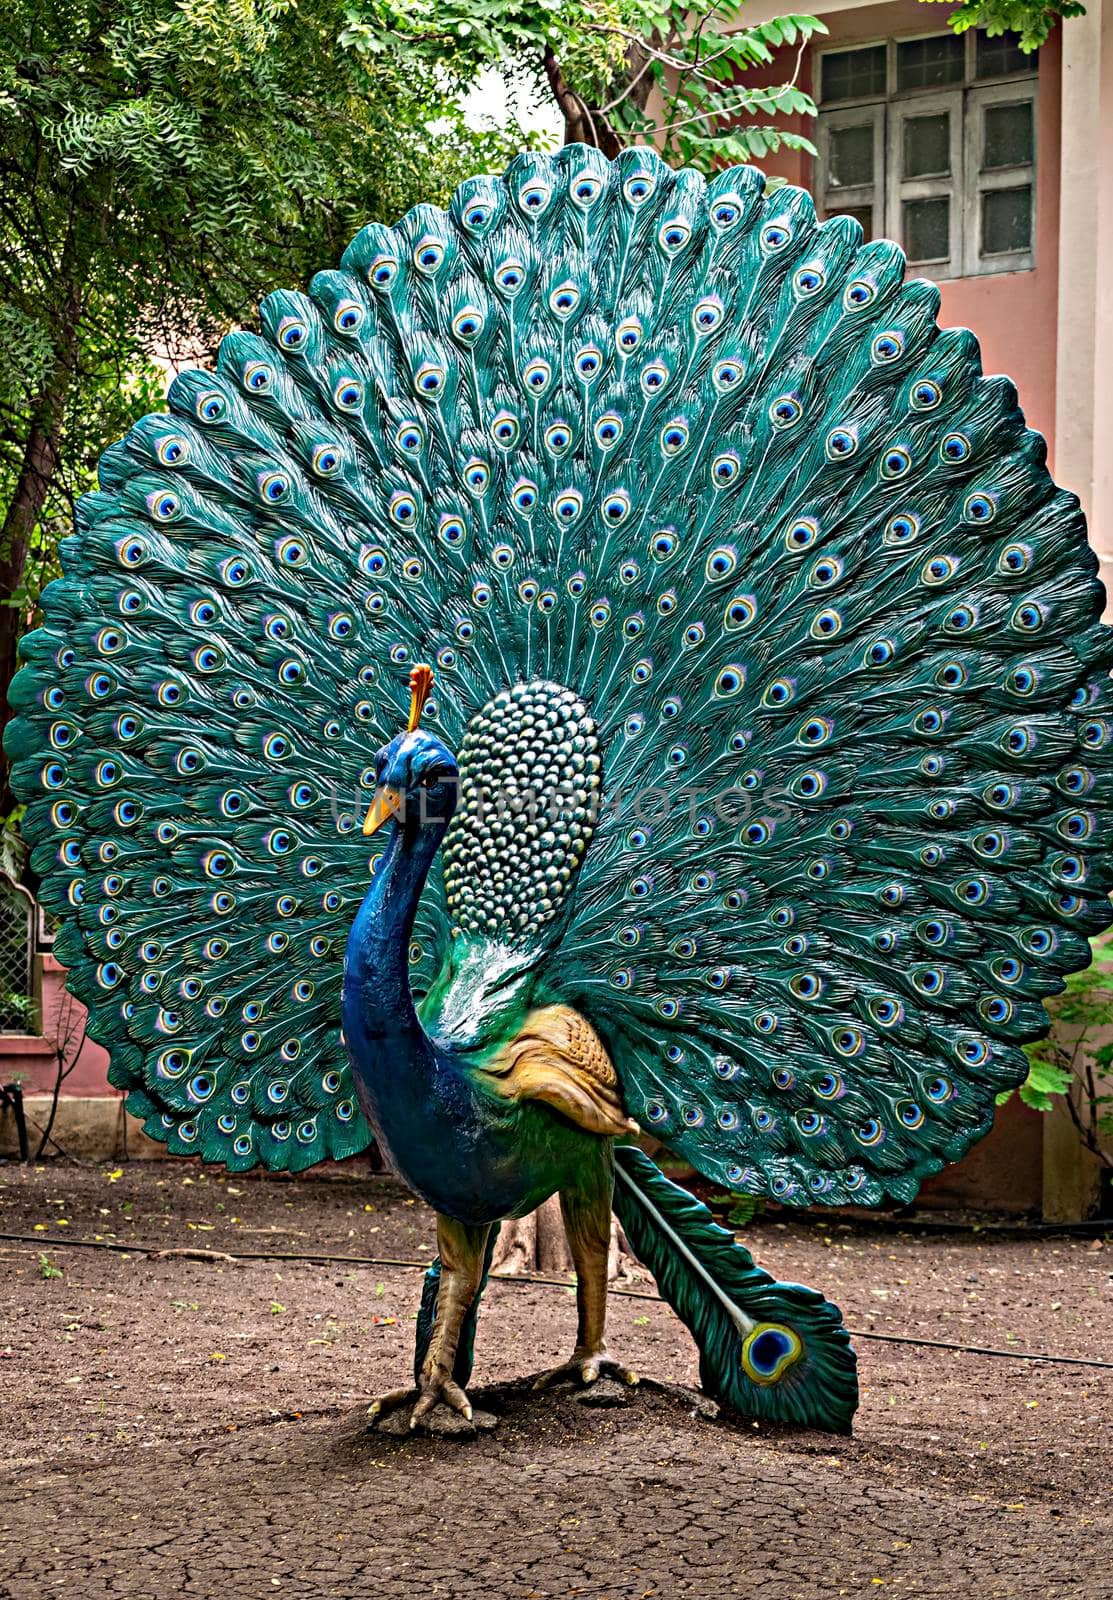 Shegaon, India - September 21st, 2018: Clay made real size sculpture of a peacock displayed in Anand vihar in Shegaon.